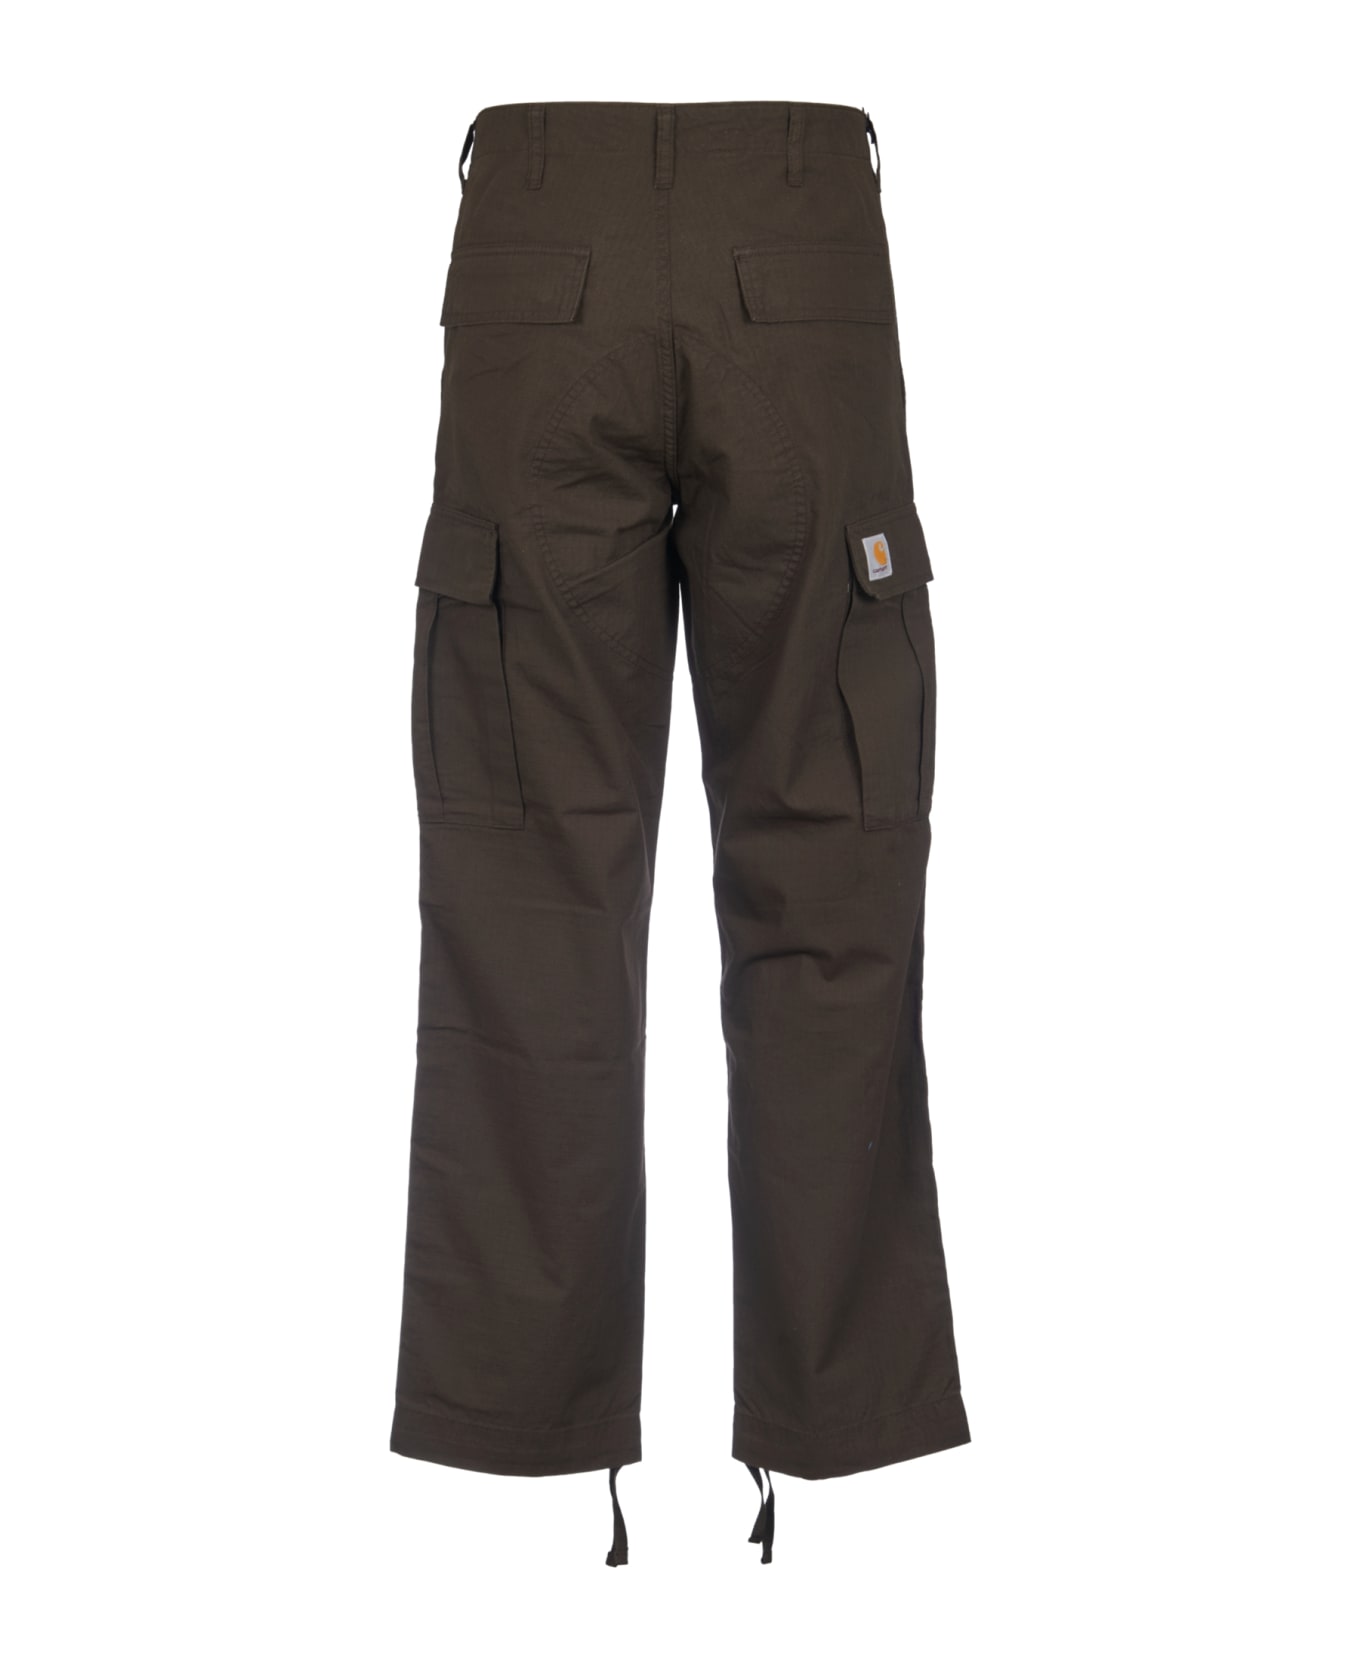 Carhartt Cargo Buttoned Trousers - Tobacco